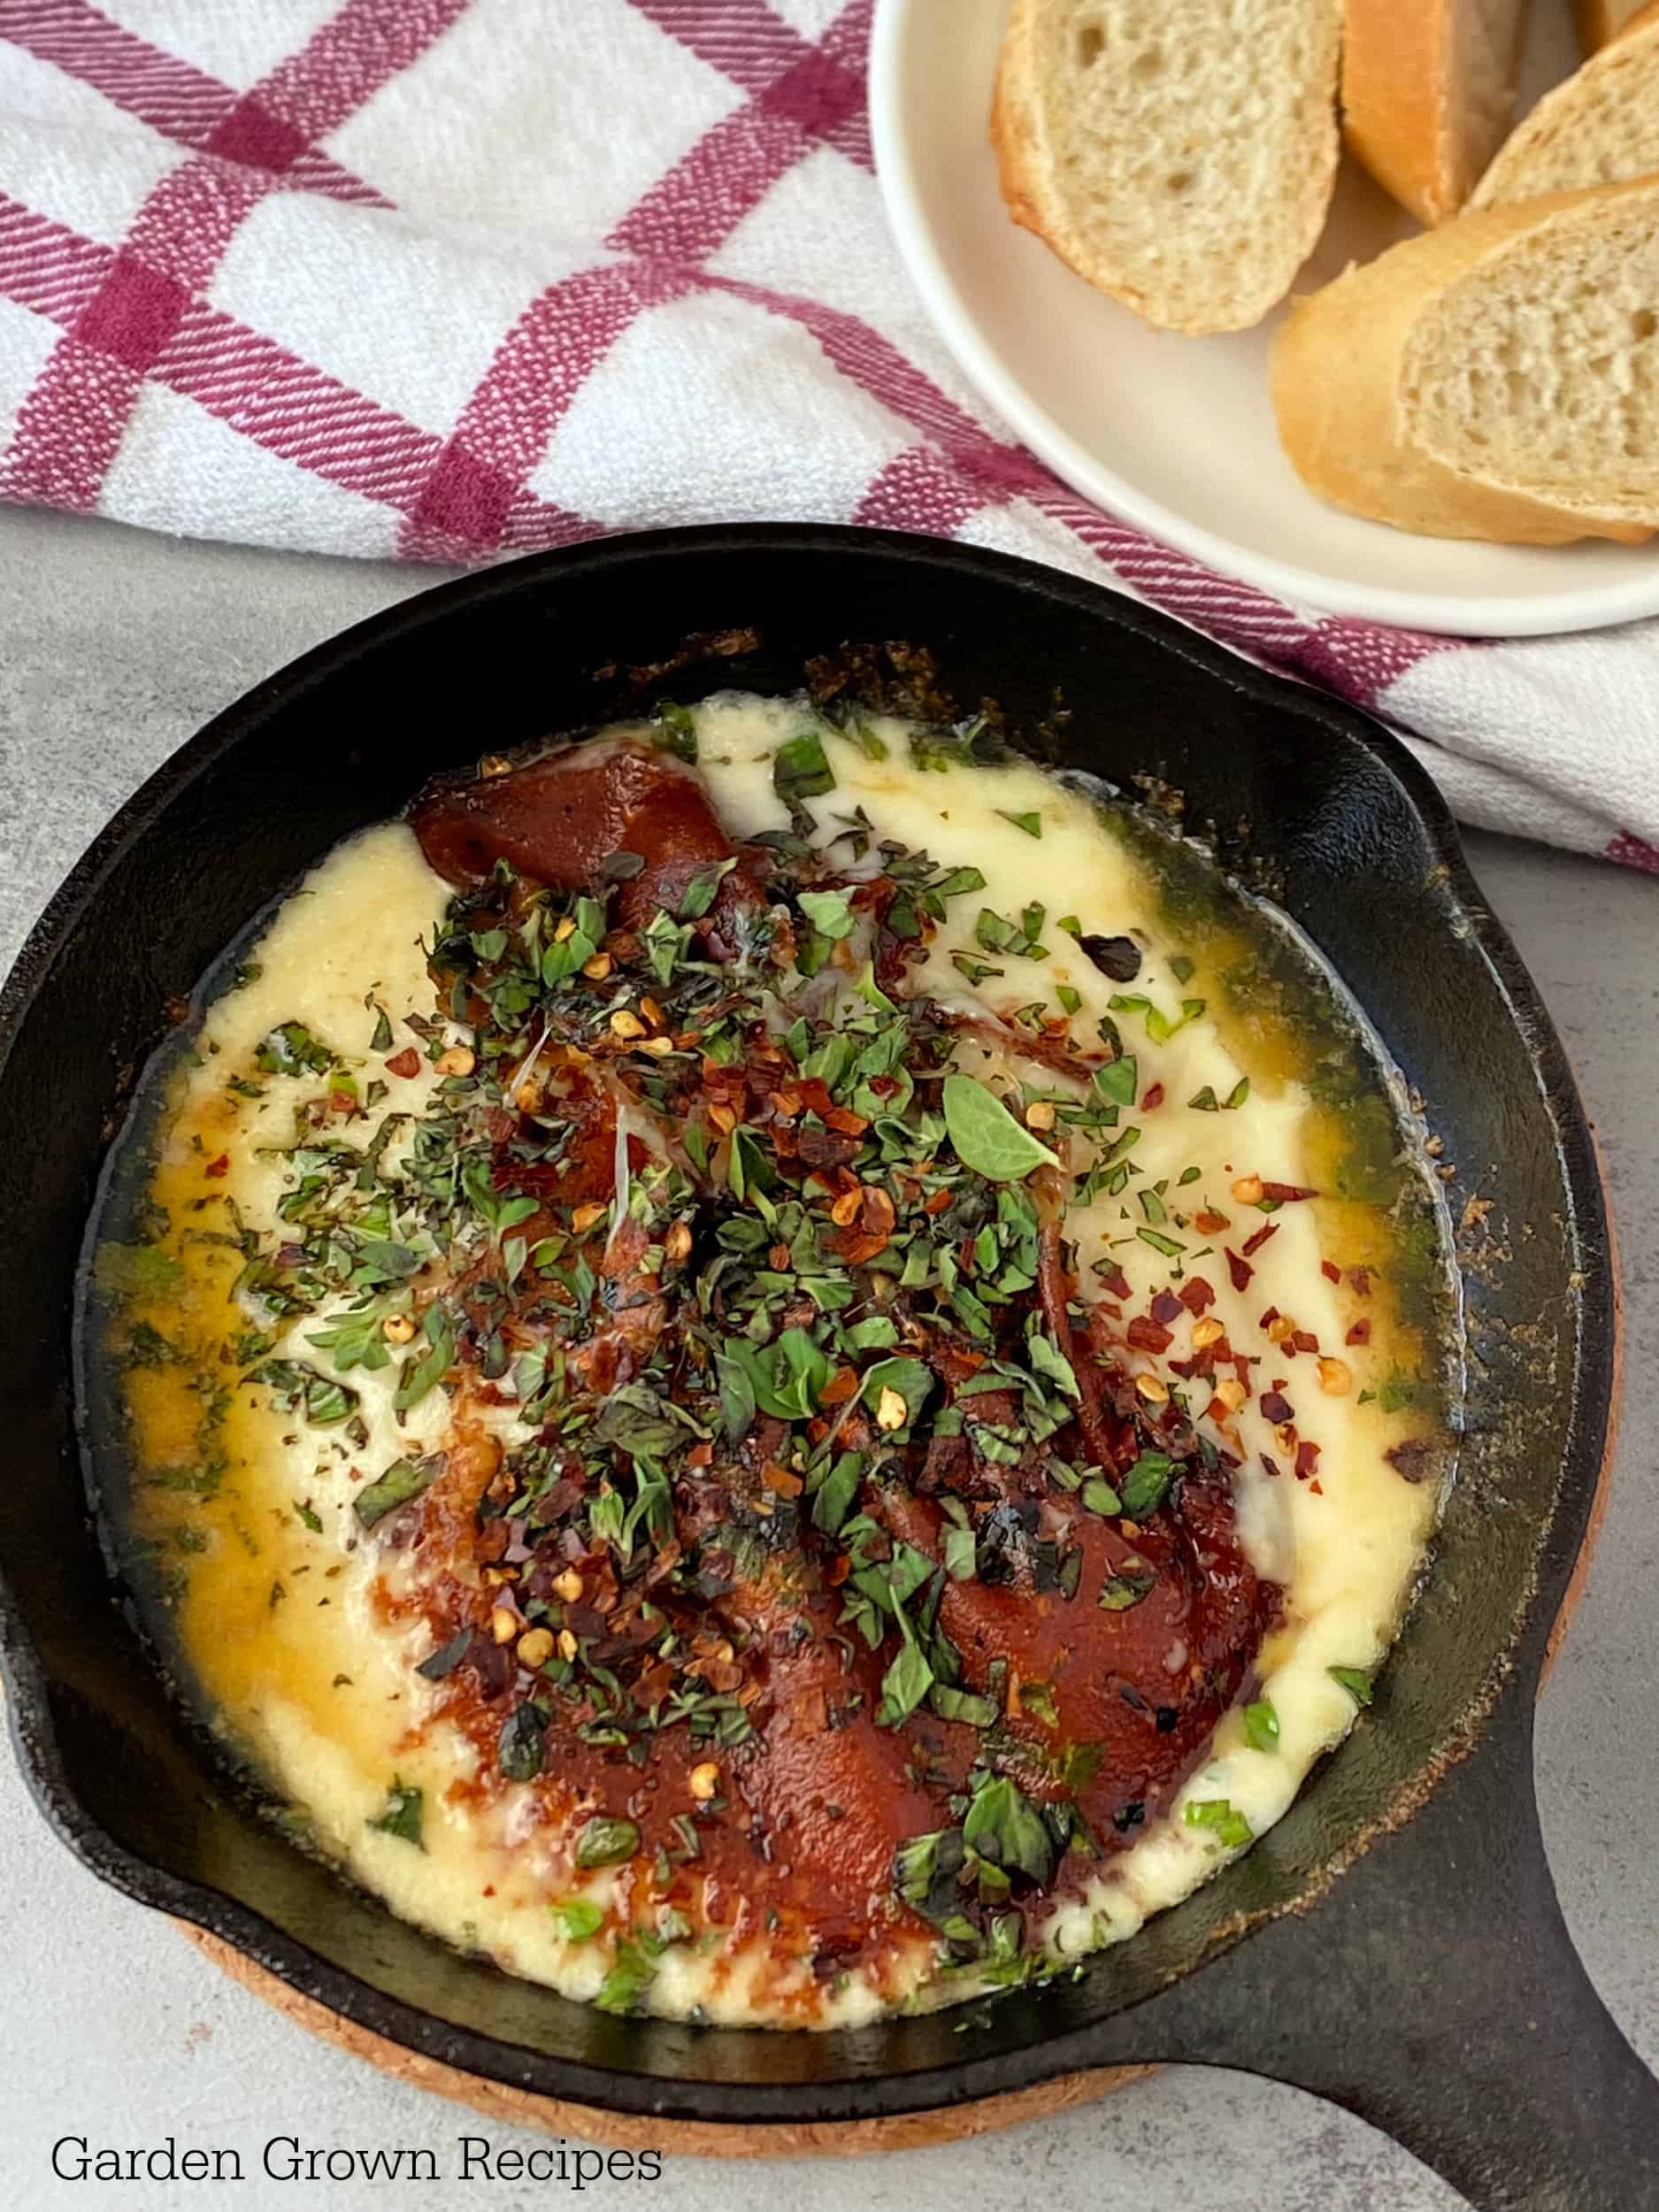 provoleta recipe herbed melted cheese 